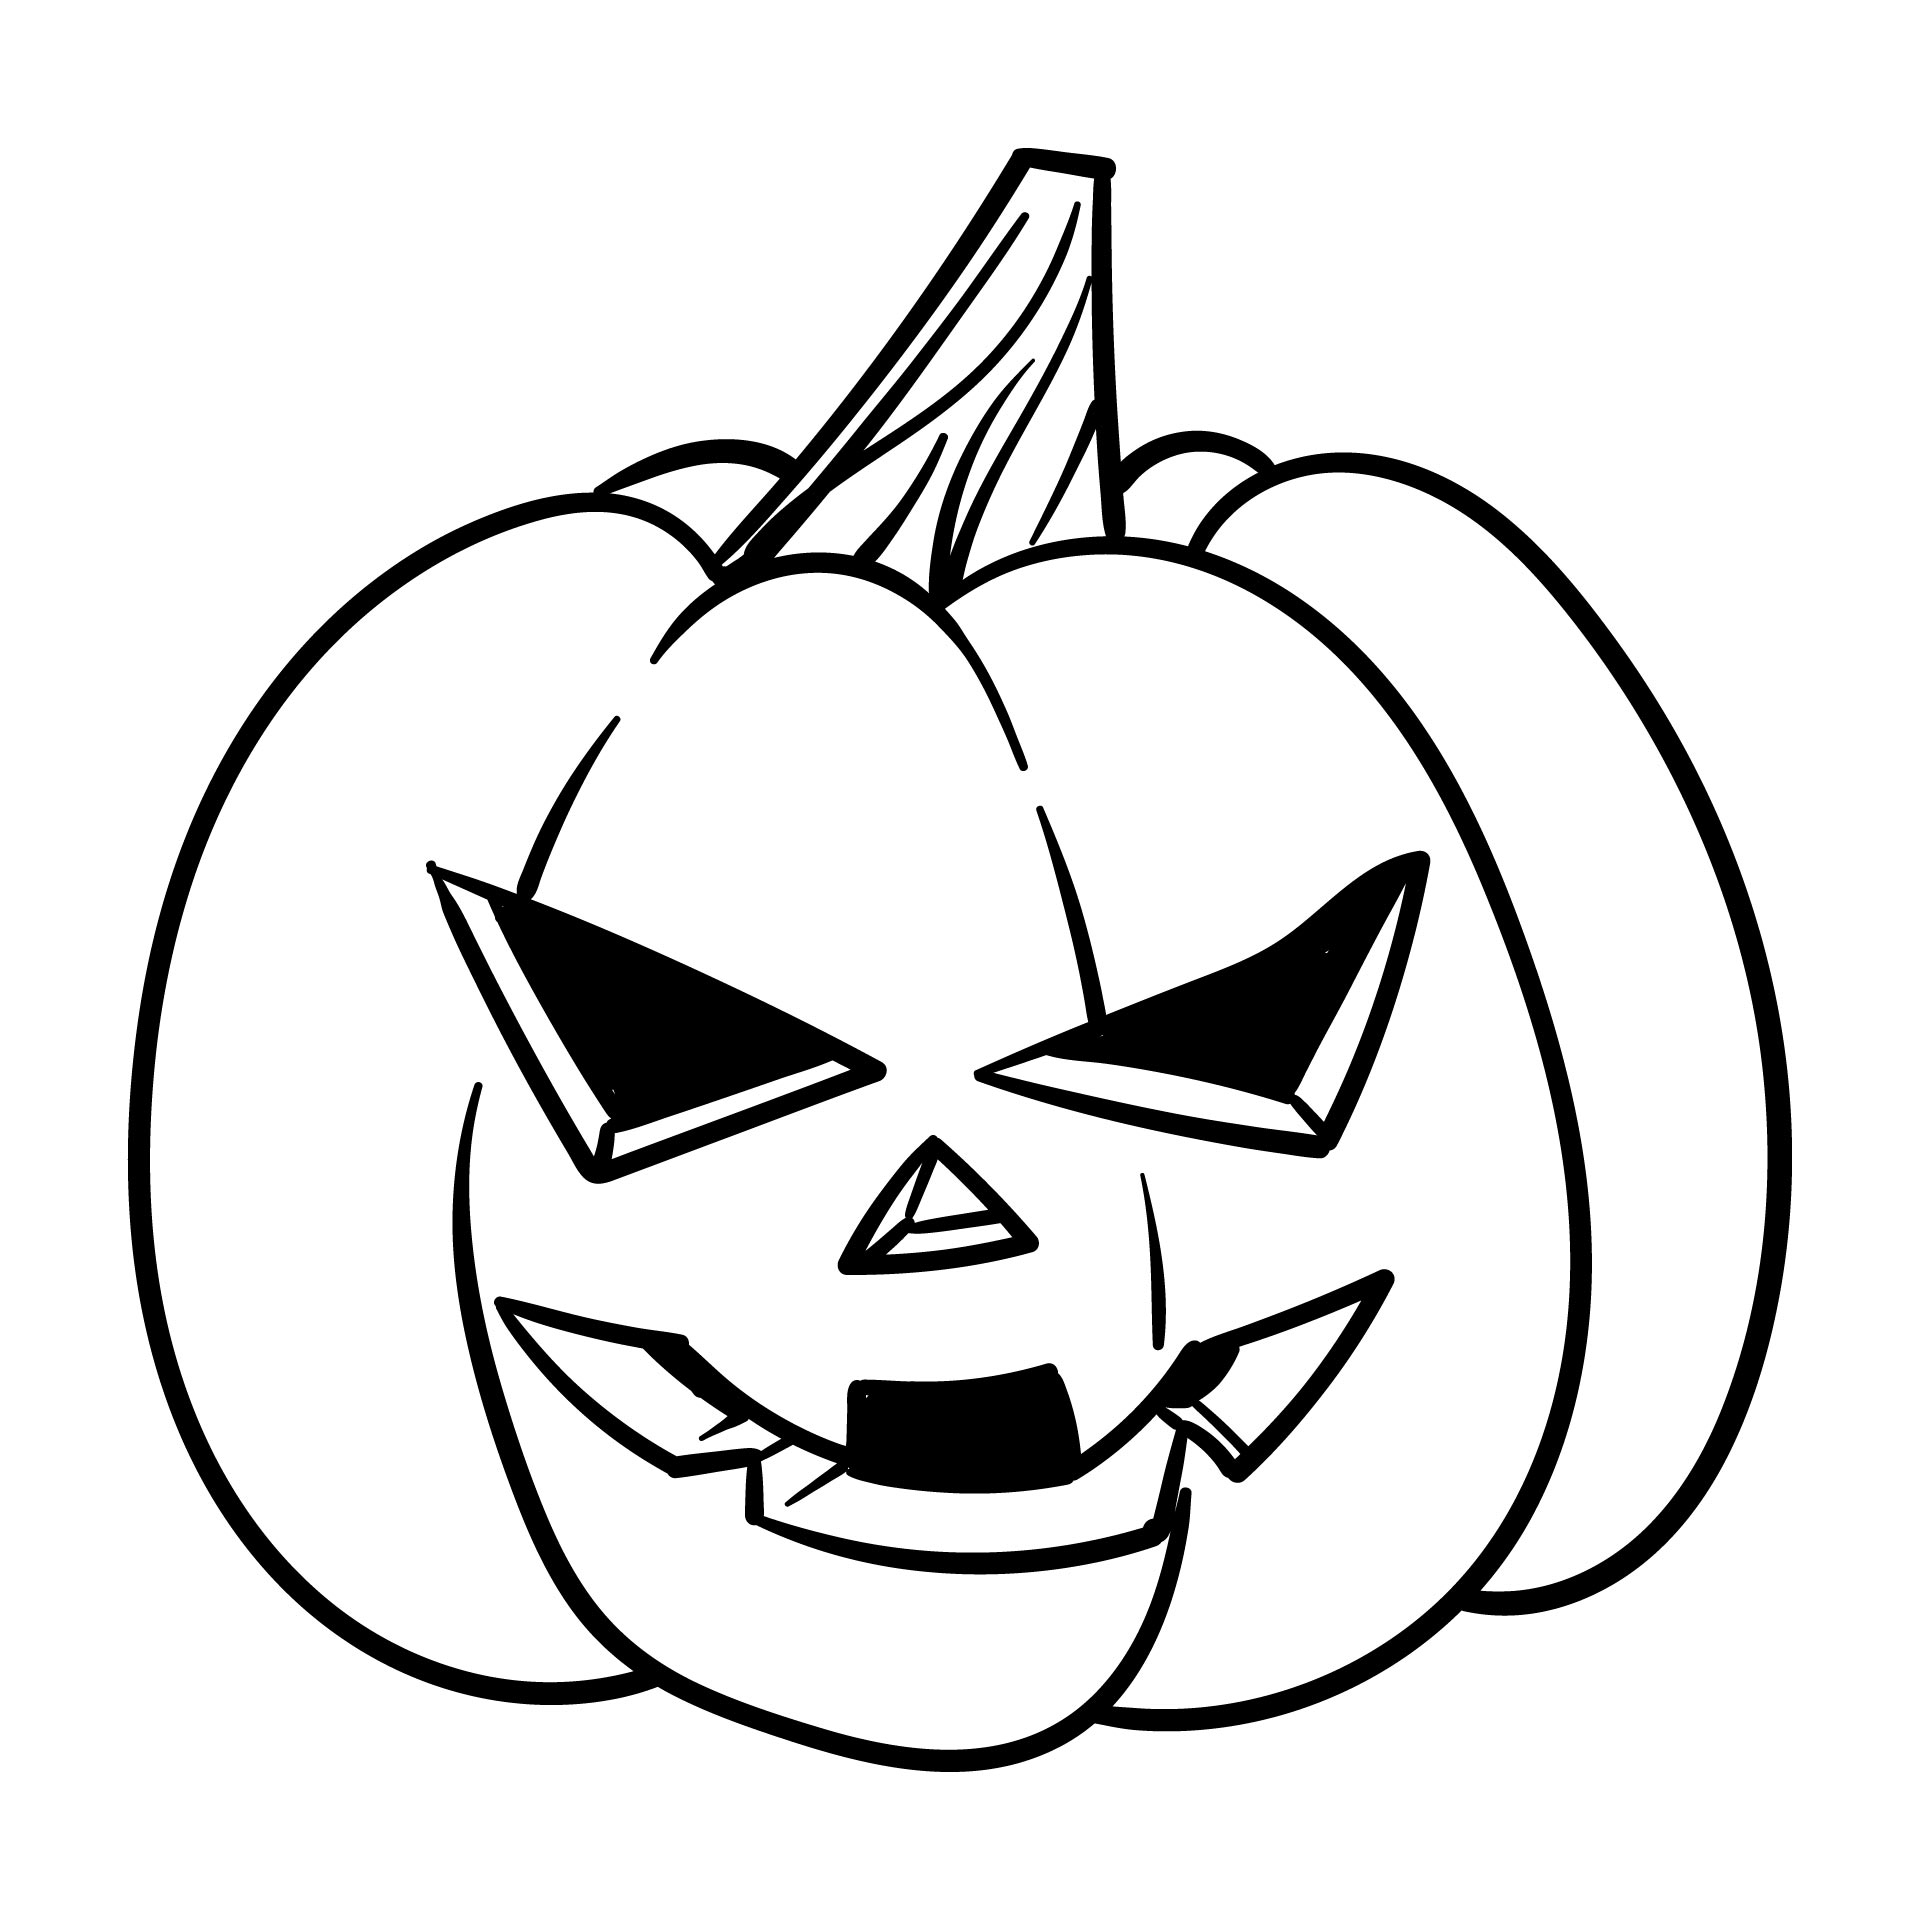 Halloween Pumpkin Coloring Pages To Print